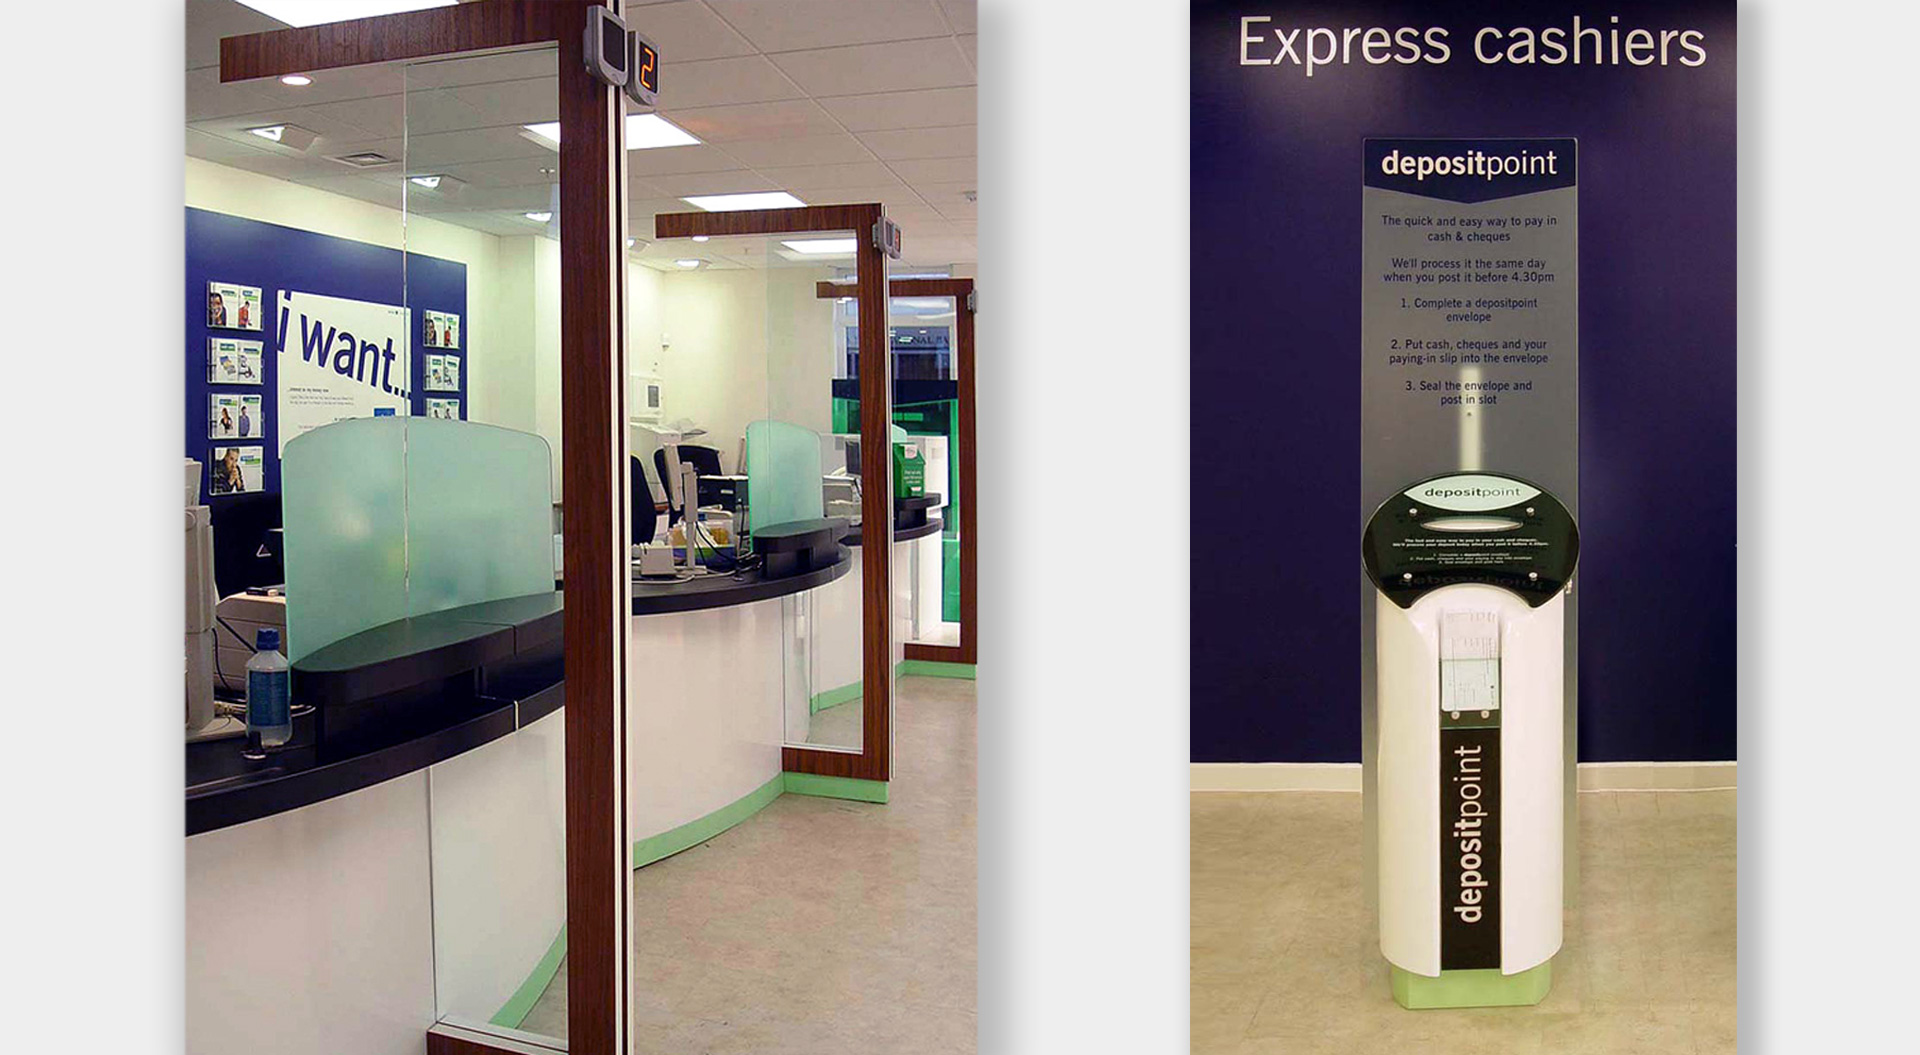 Lloyds Bank Teller desks and express cahier and deposit point 